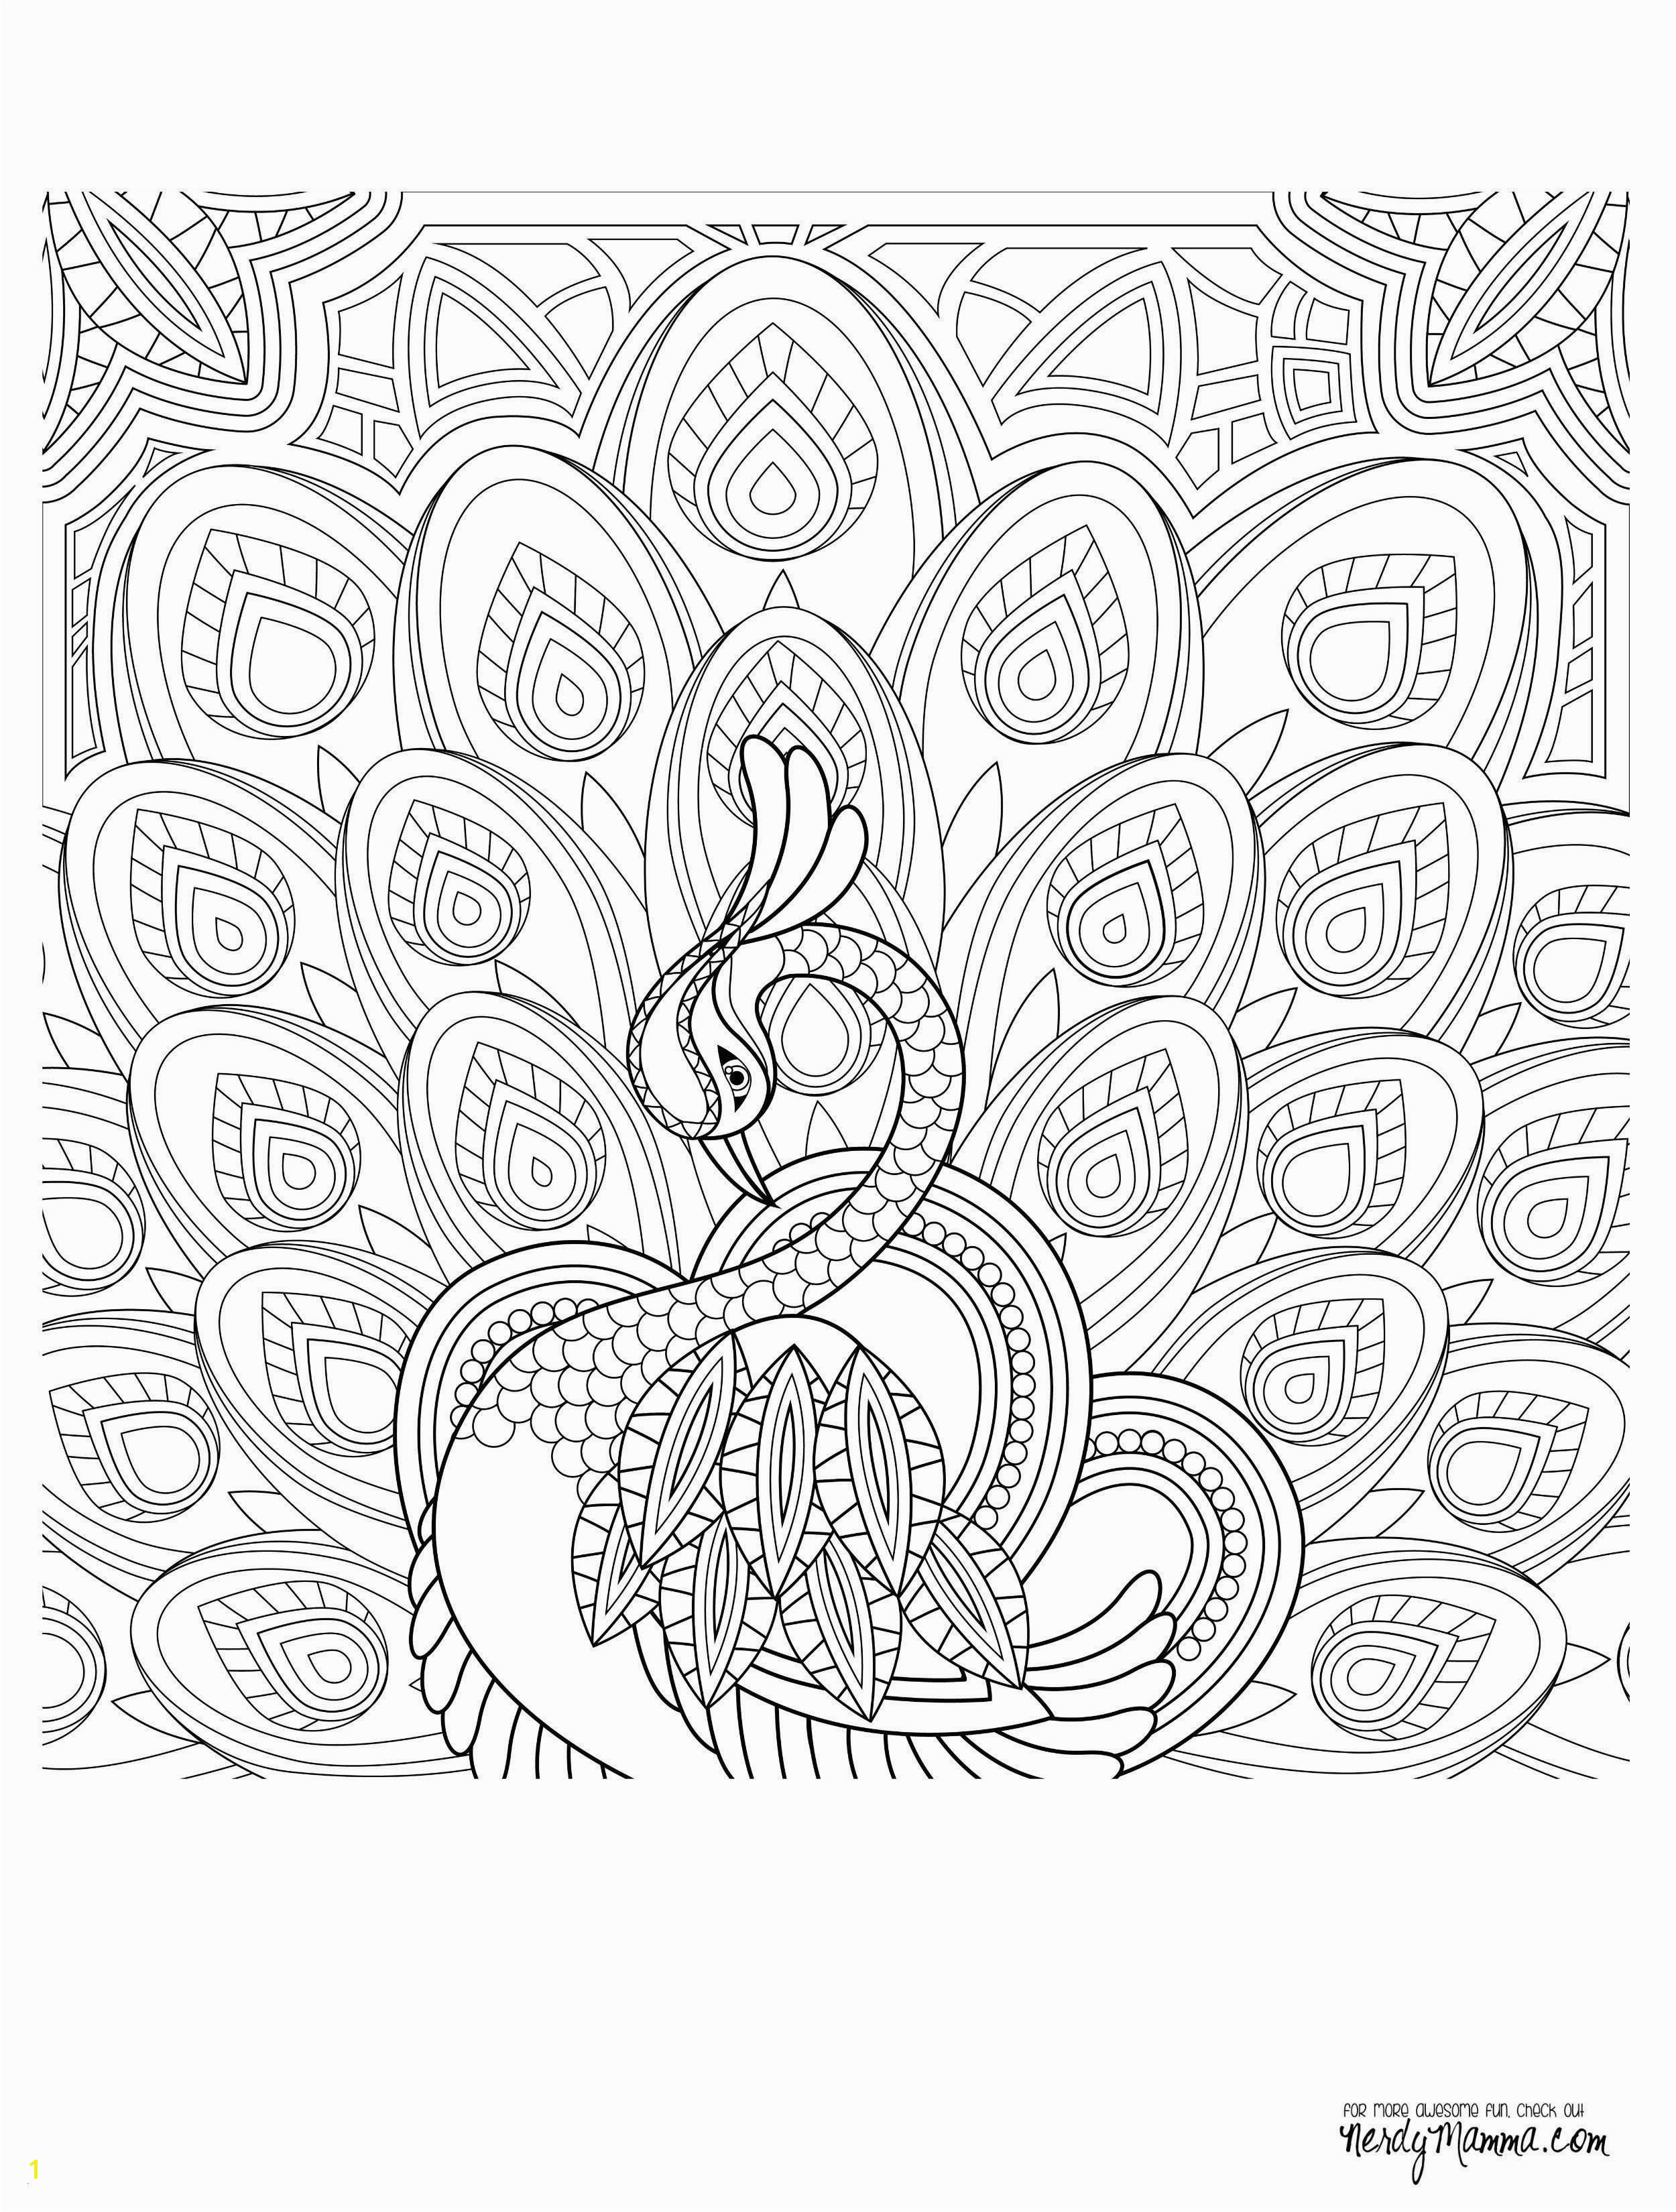 Daniel and the Lions Den Coloring Page Daniel In the Lions Den Coloring Page Luxury 145 Best Daniel and the